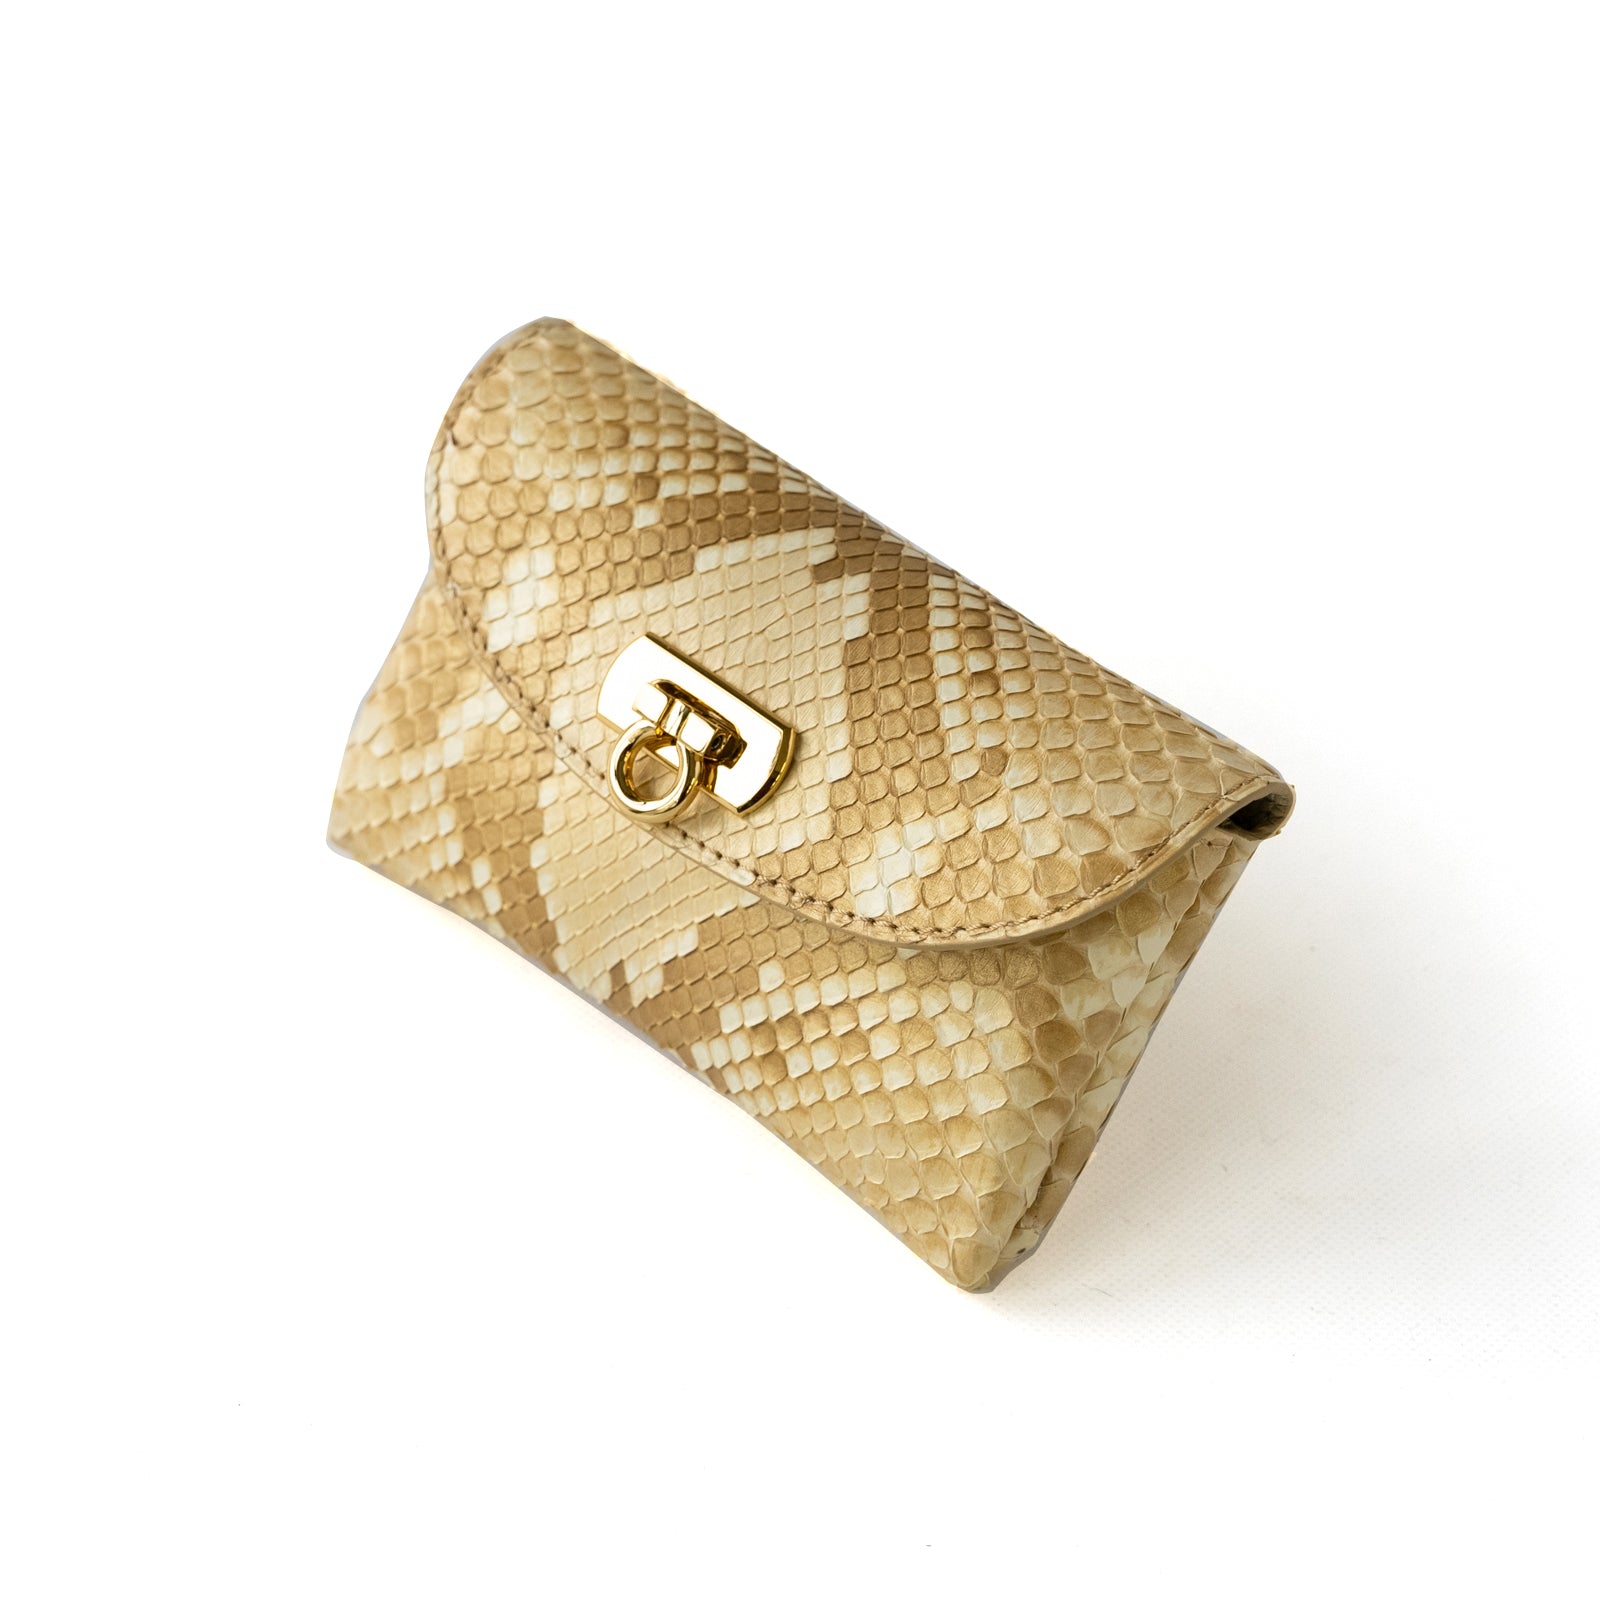 Soft leather flap middle wallet / Gold python / Pearl gold